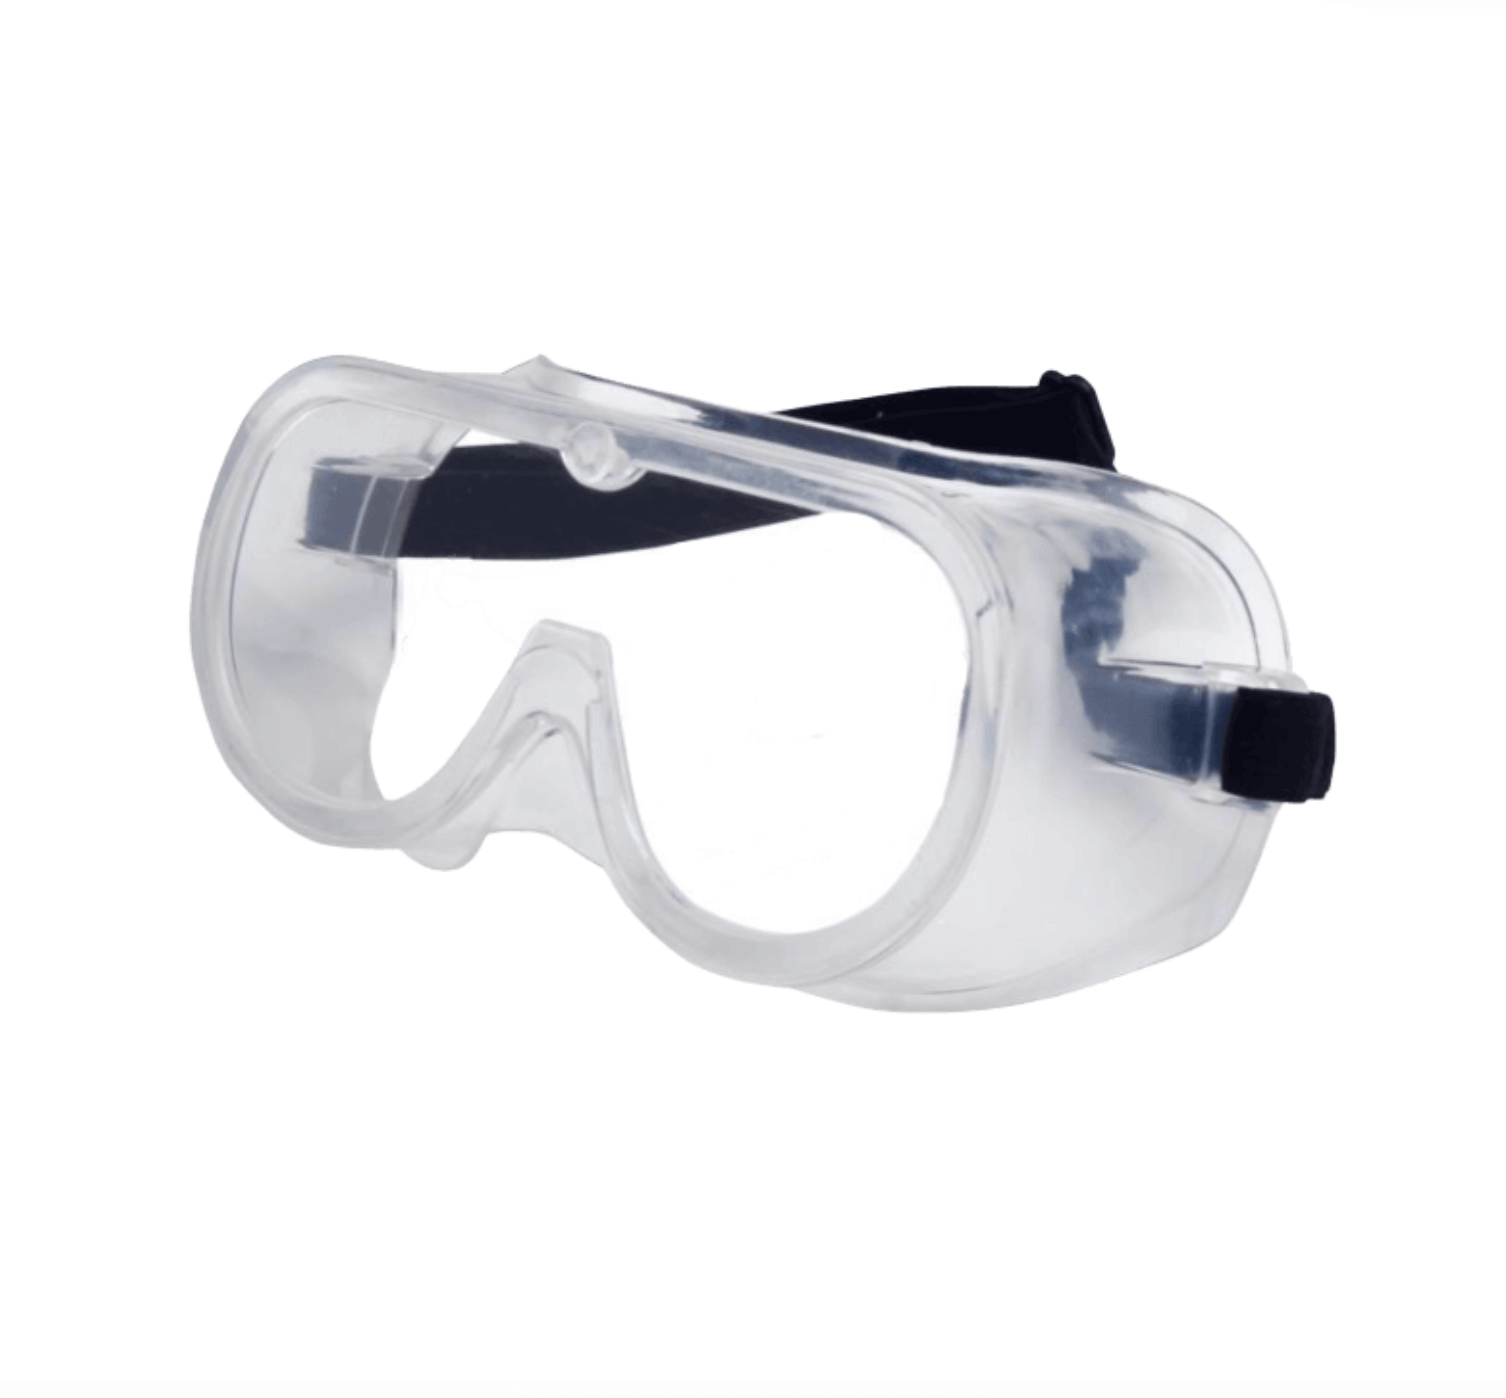 safety goggles - safety glasses - Medical Goggles - Protective eyewear - safety goggles supplier